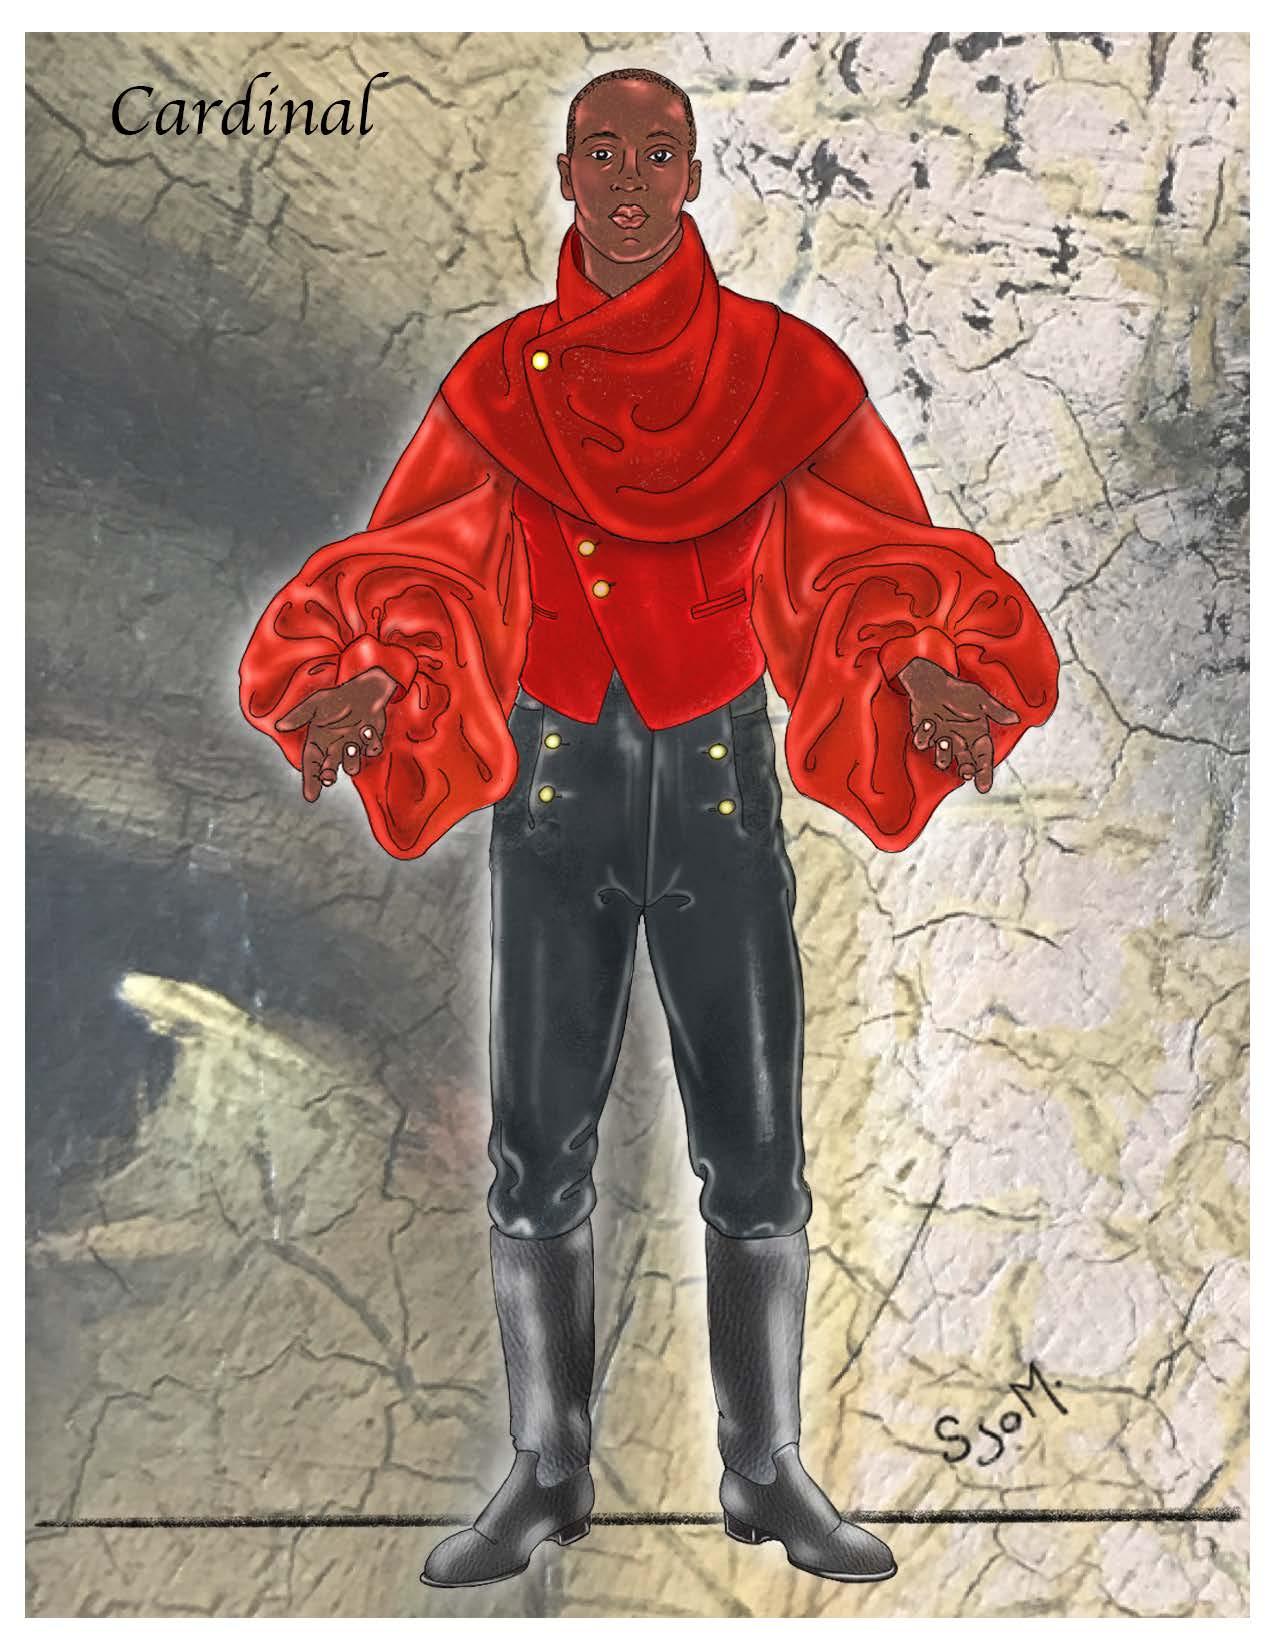 illustration of a man wearing a dramatic red top with very puffy sleeves and a mantel and vest, black pants and knee-high boots